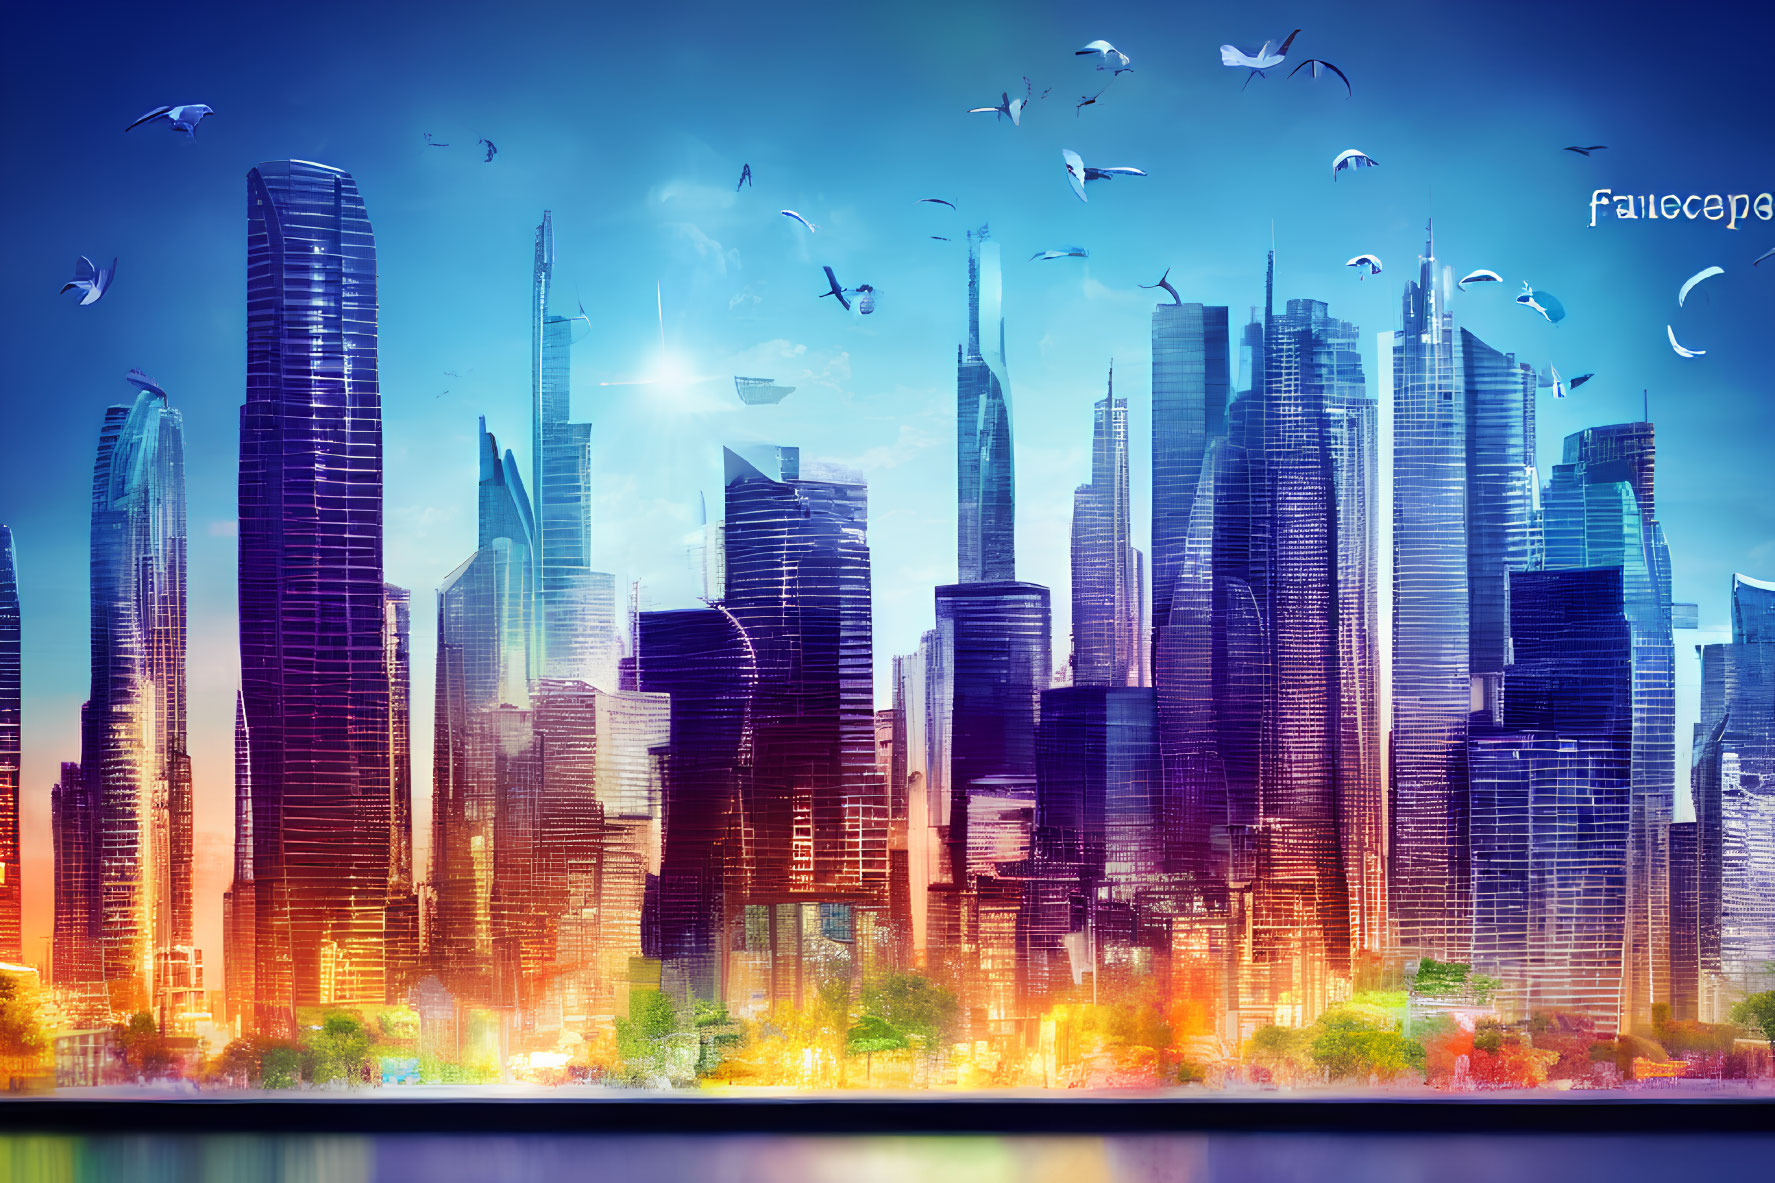 Reflective skyscrapers in vibrant futuristic skyline with birds and colorful glow.